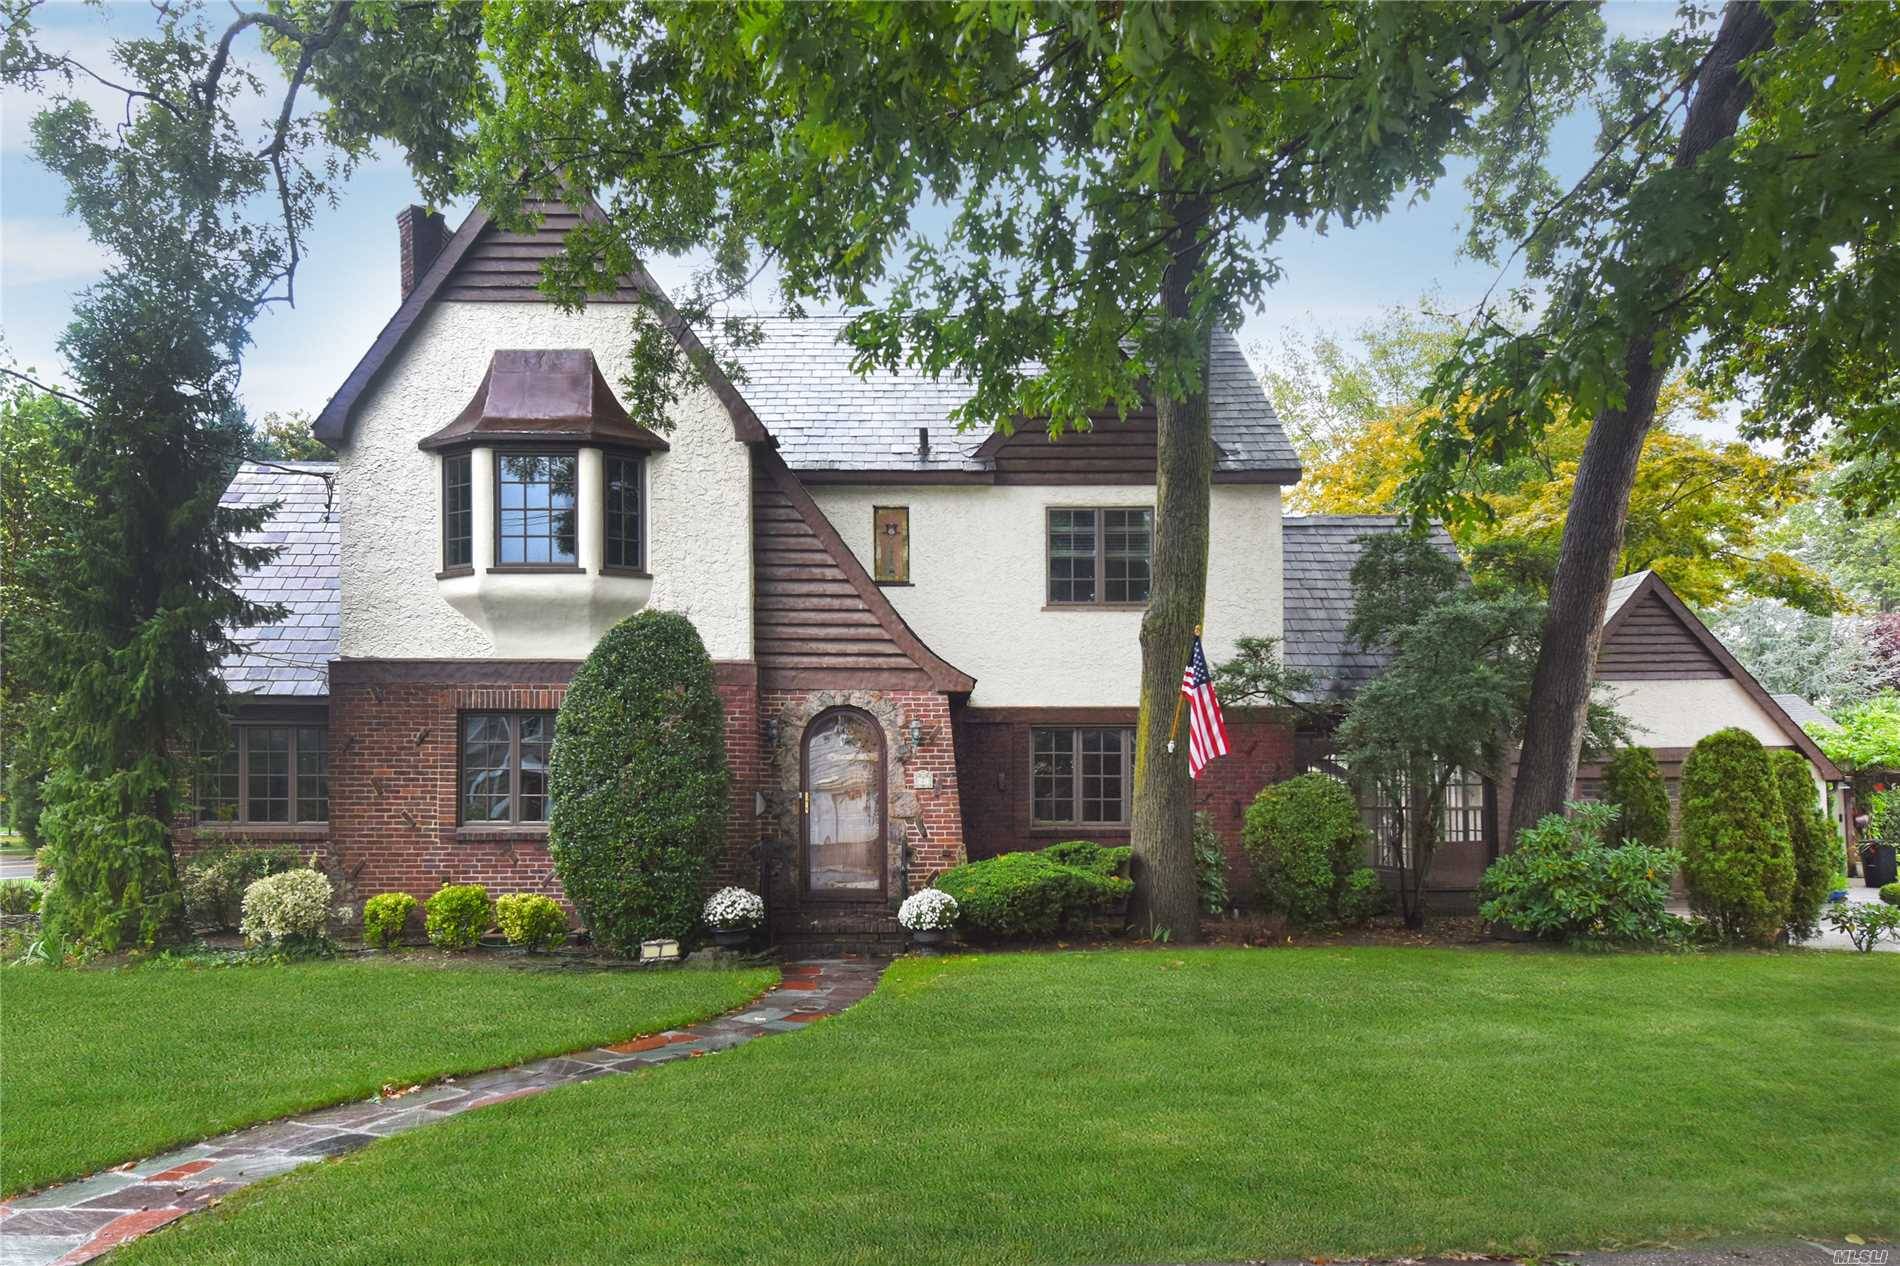 Colonial Style Tudor In Old Canterbury Boasts Expansive Rooms With Rich Mouldings, High Ceilings And Hard Wood Floors.